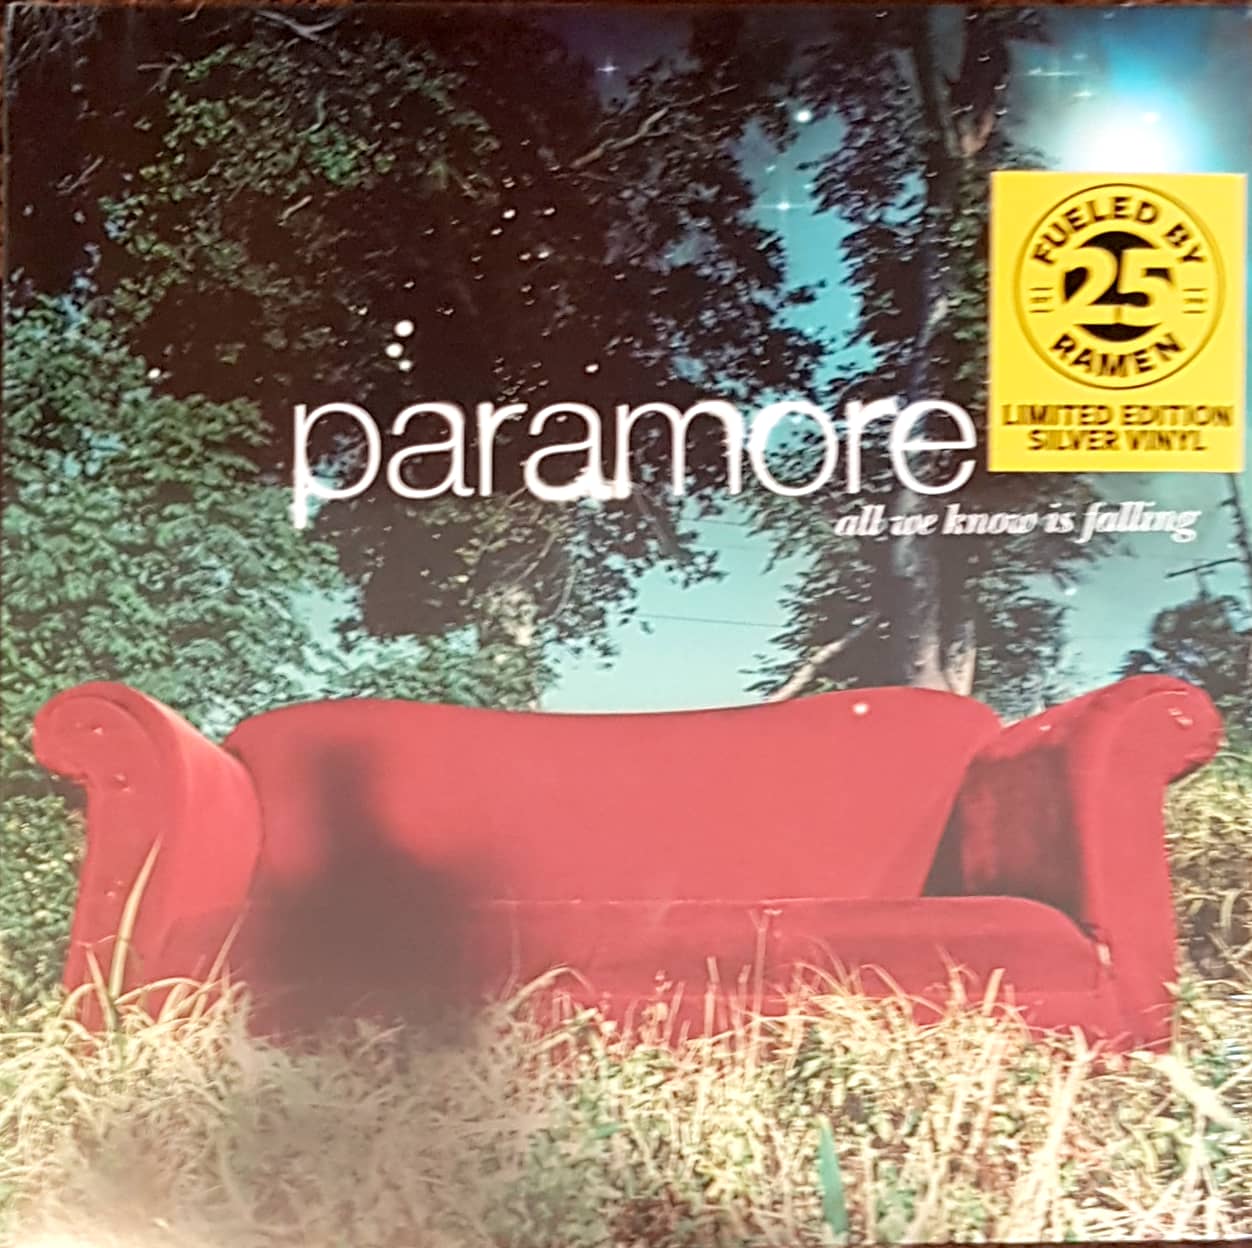 Paramore - All We Know Is Falling (Limited Ed/ Silver Vinyl) – Stash Records